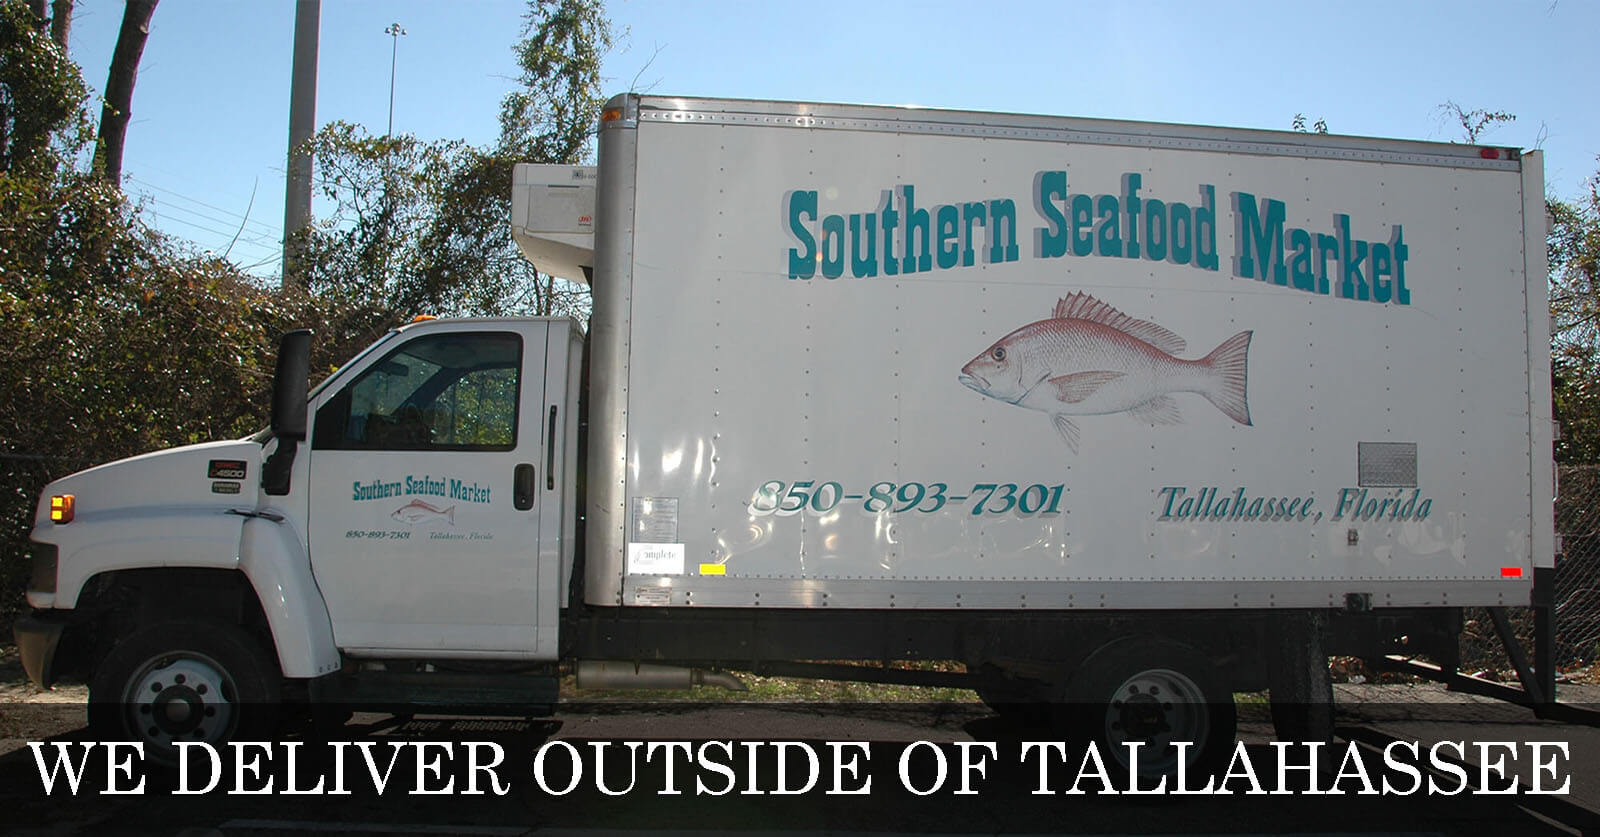 We Deliver - Southern Seafood Delivery Truck